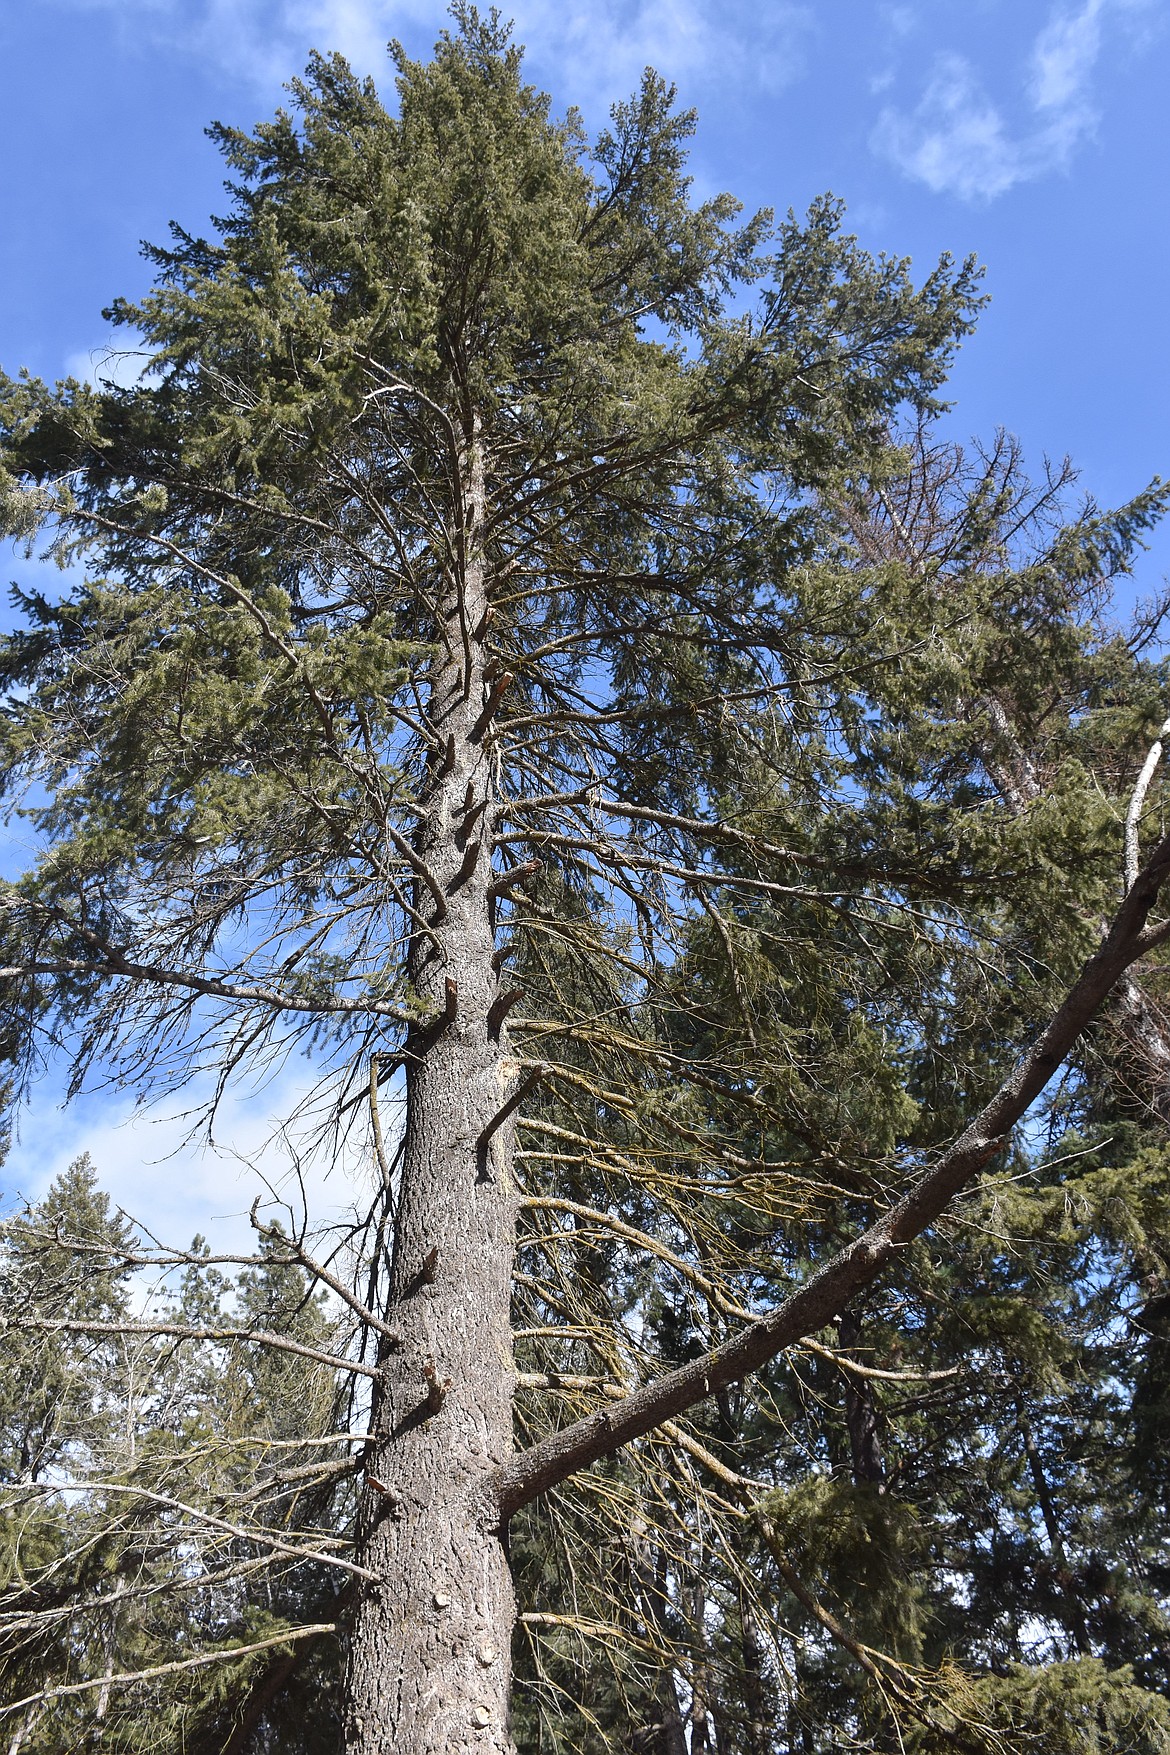 The branches of established Douglas fir trees are a significant distance away from the ground, which keeps its needles safer from wildfires.